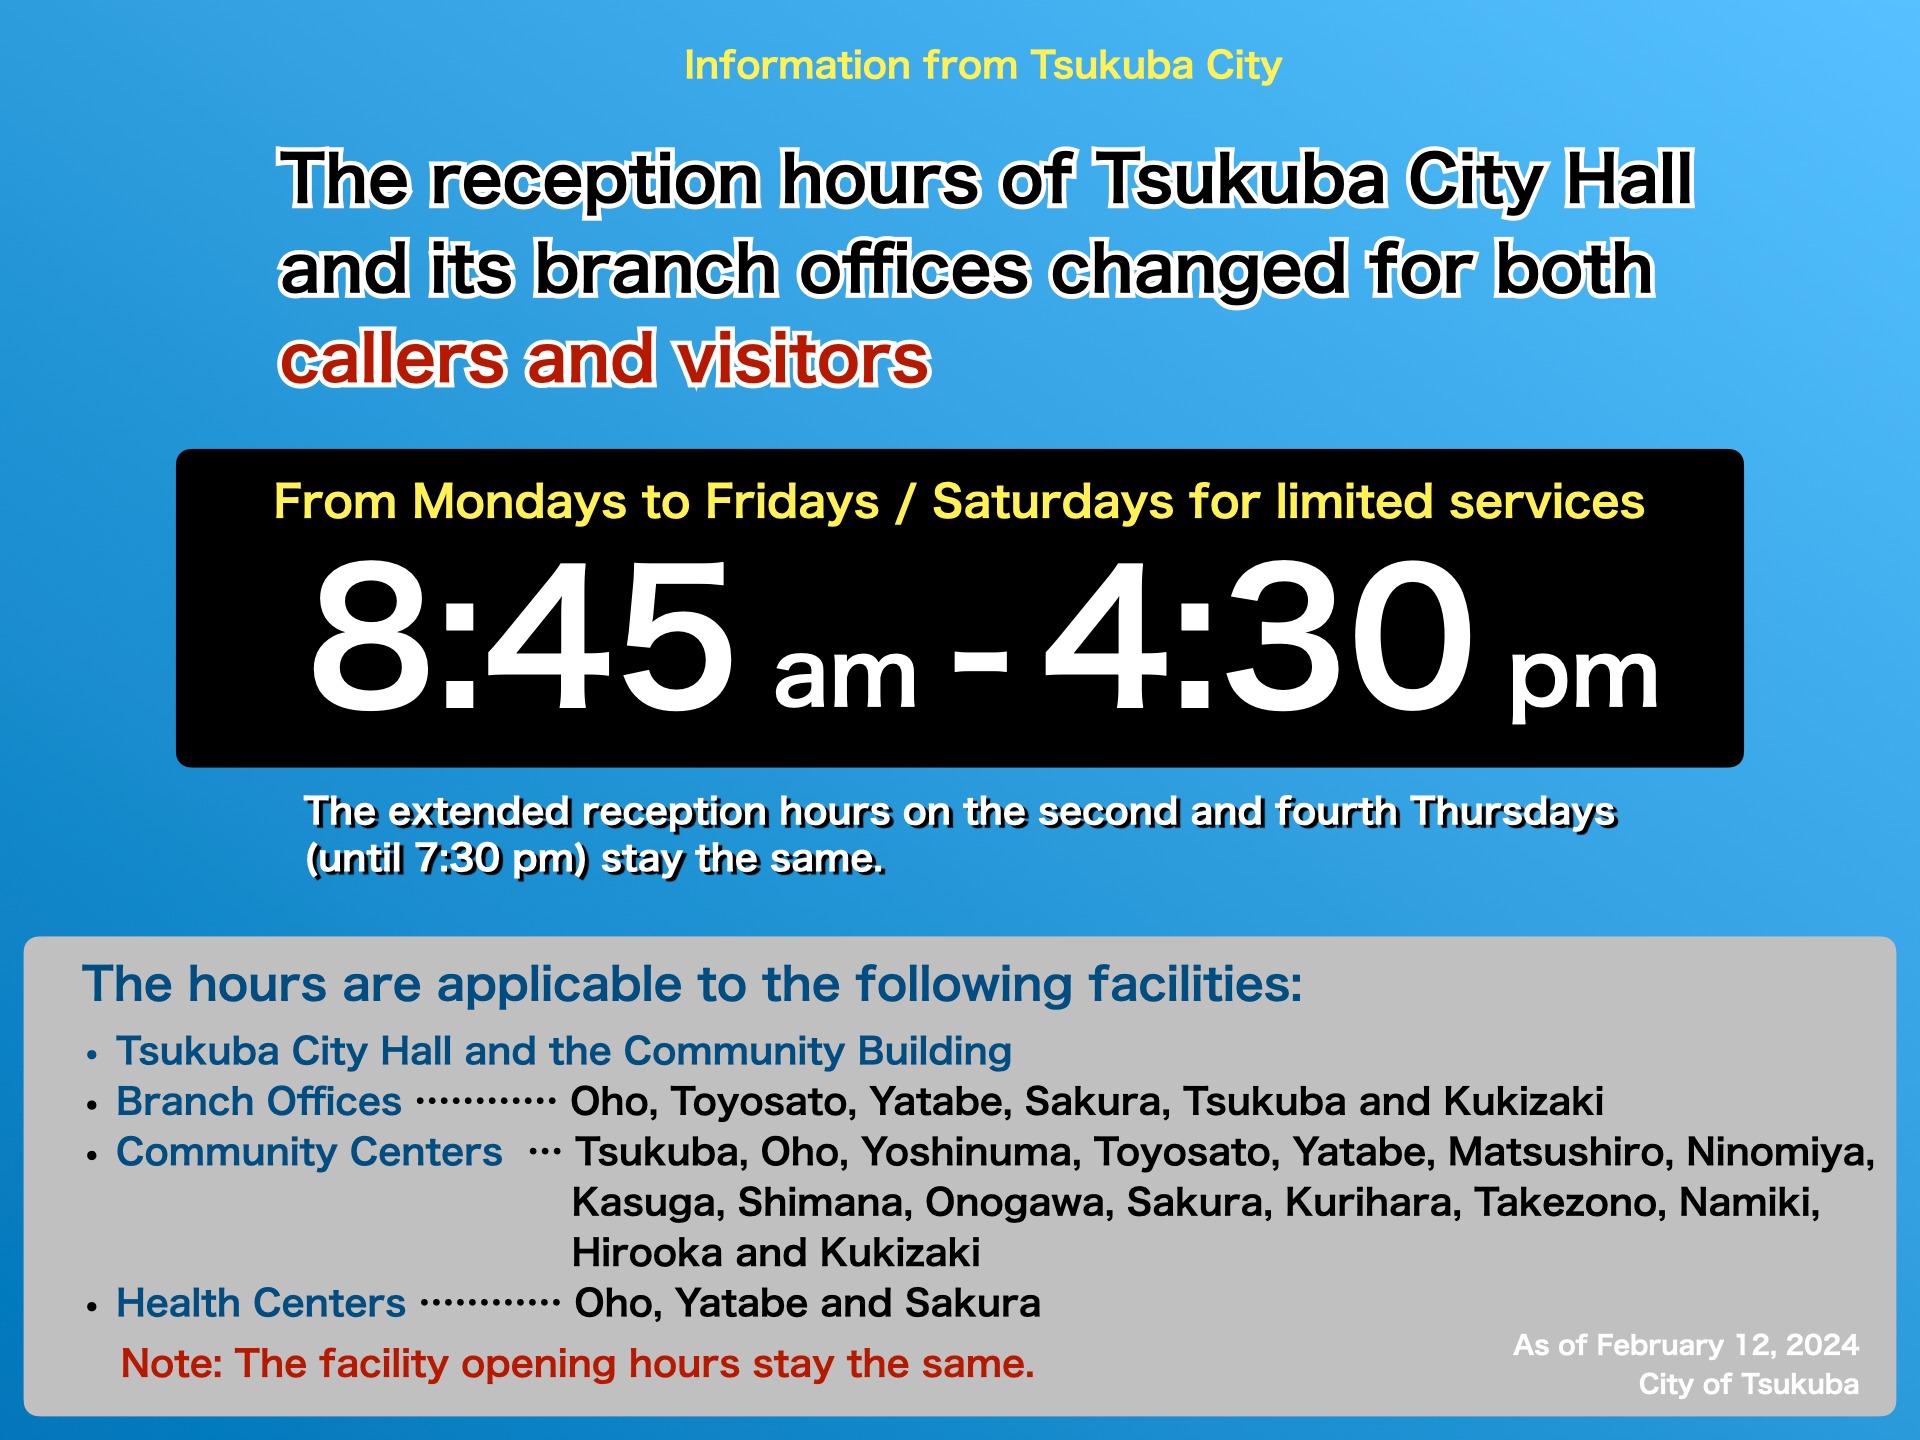 The reception hours changed for both callers and visitors.